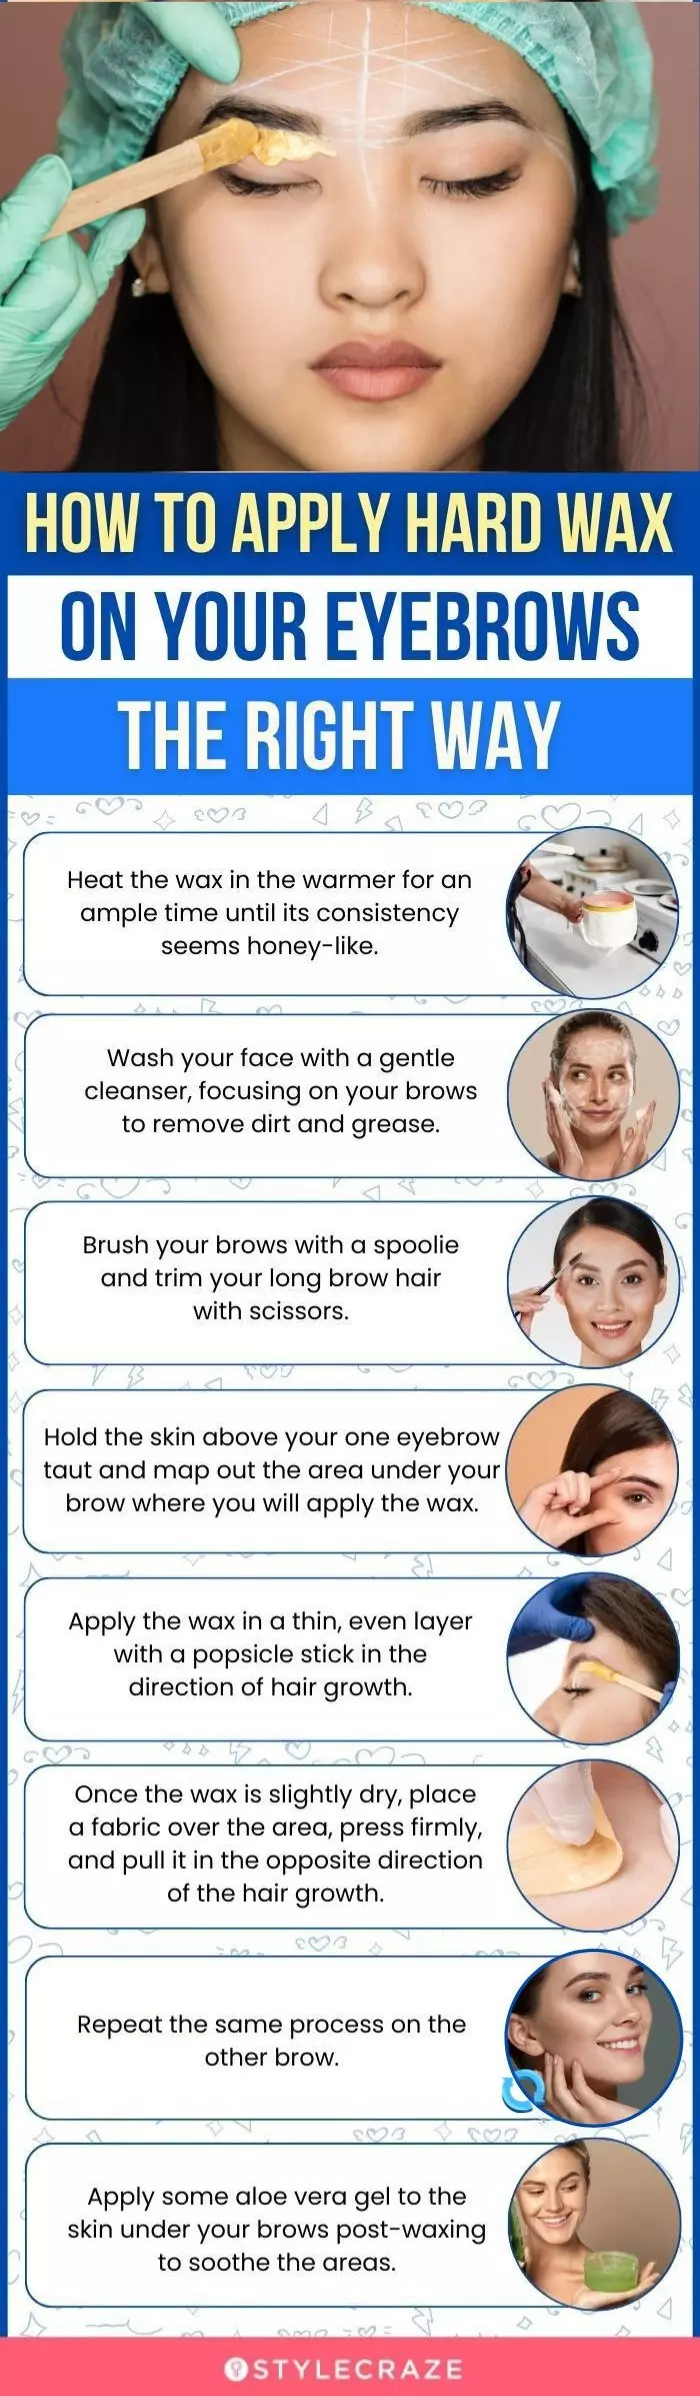 How To Apply Hard Wax On Your Eyebrows The Right Way (infographic)